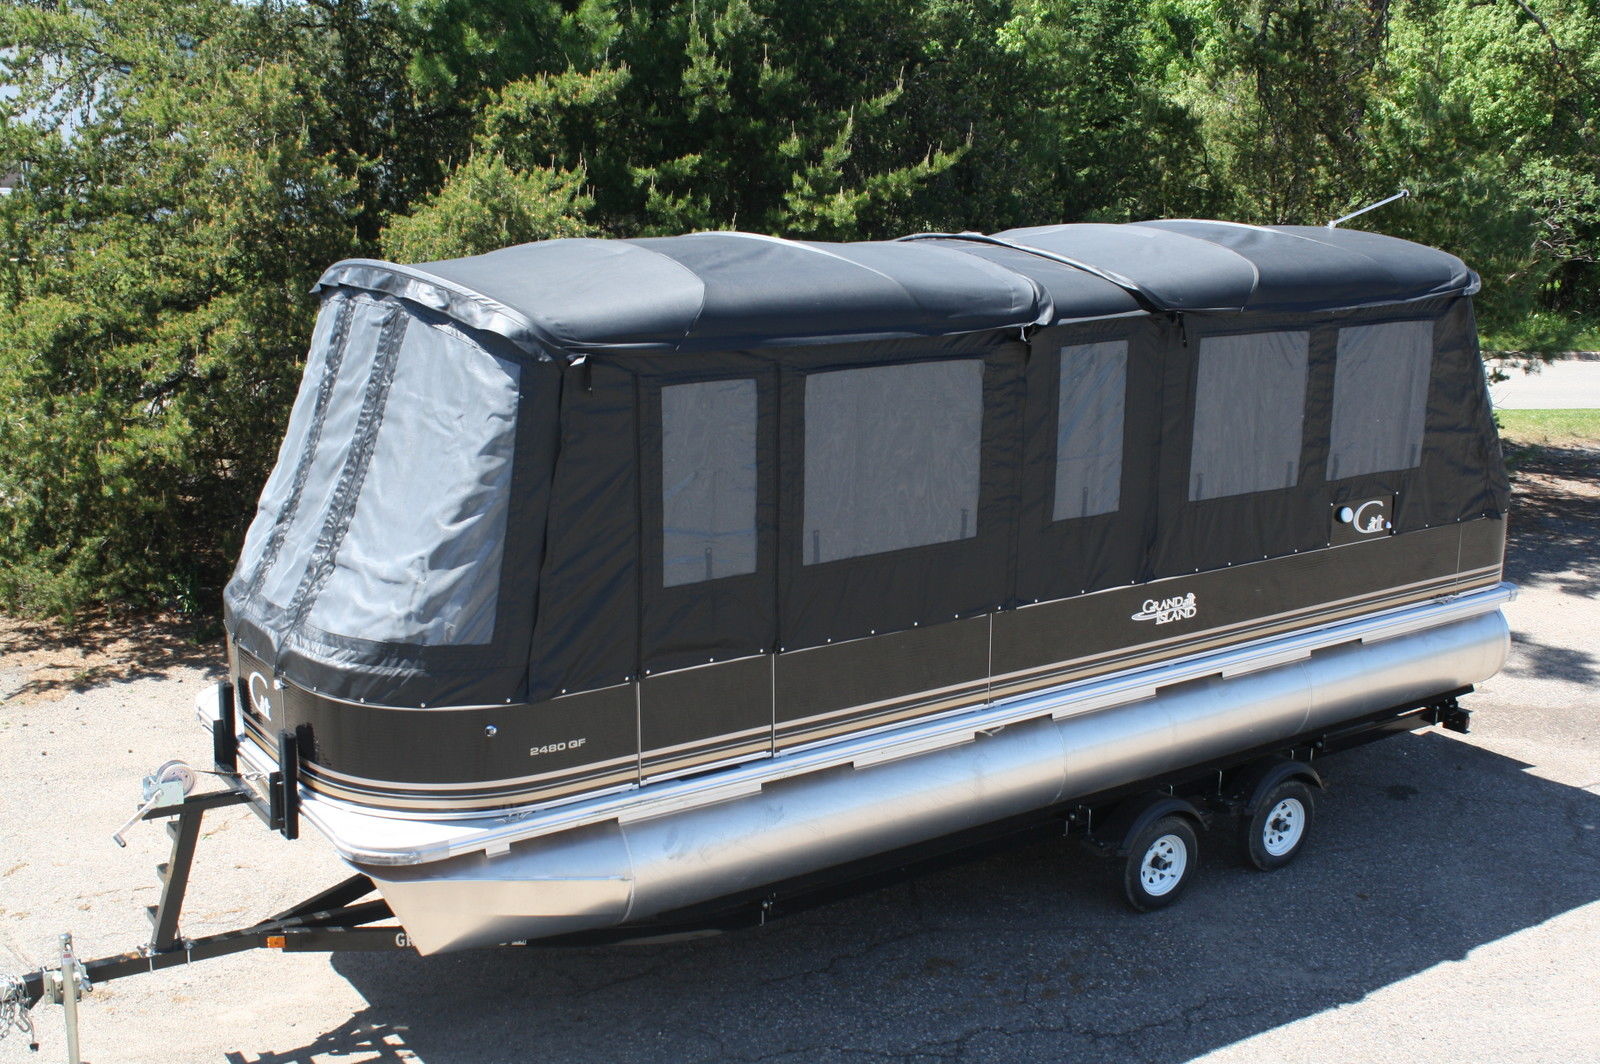 this is a new 24 ft grand island fish and fun pontoon boat. this is my best...